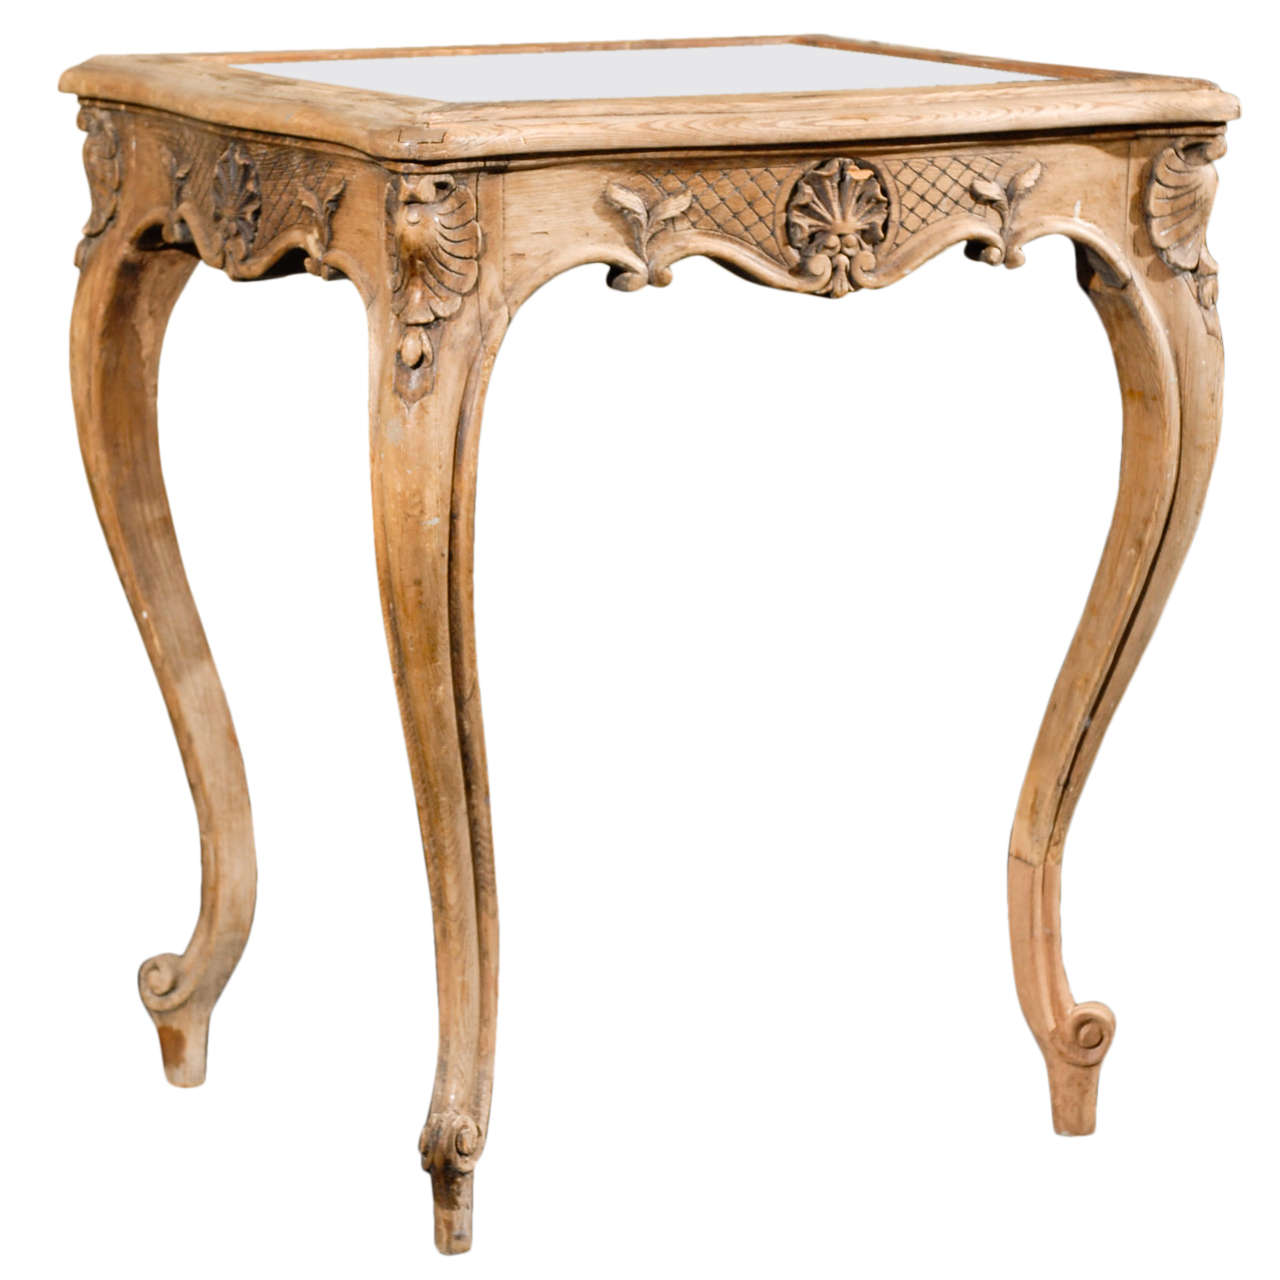 French 19th Century Brown Side/Drink Table with Mirrored Top and Leaf Carvings